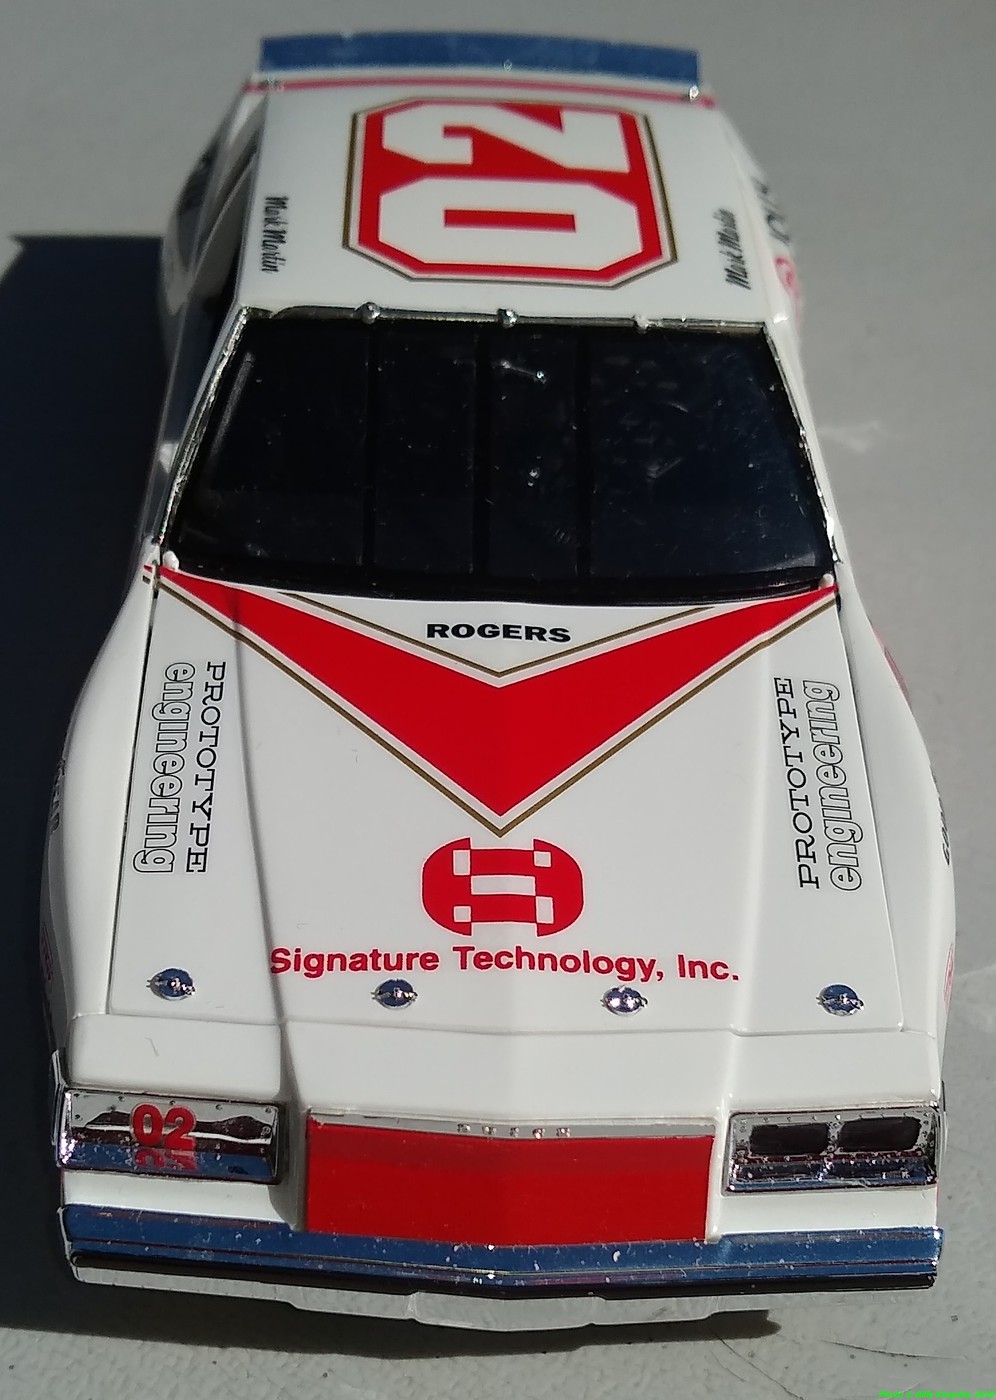 Randy Ayers Nascar Modeling Forums :: View topic - 1982 Mark Martin #02 ...